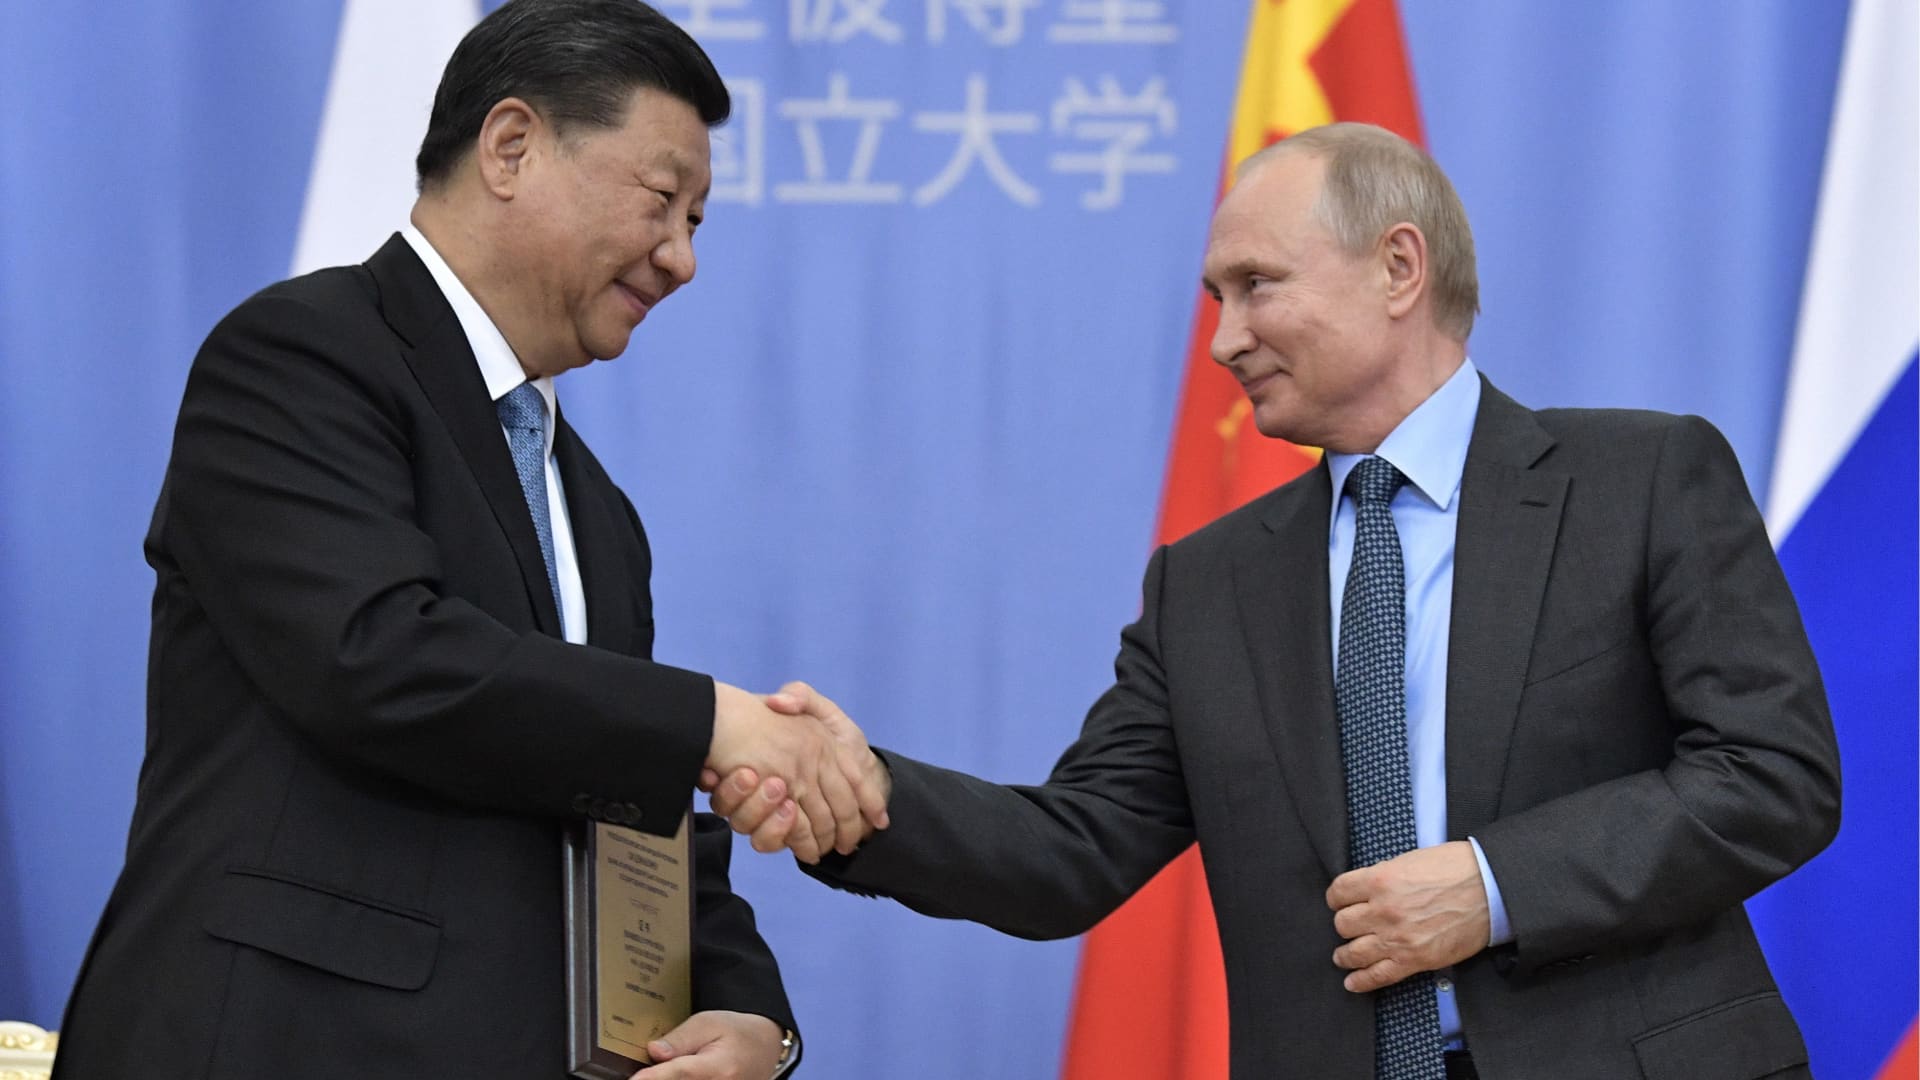 ST PETERSBURG, RUSSIA - JUNE 6, 2019: China's Persident Xi Jinping (L) and Russia's President Vladimir Putin shake hands at a ceremony at St Petersburg University in which Xi Jinping was awarded St Petersburg University honorary doctoral degree.